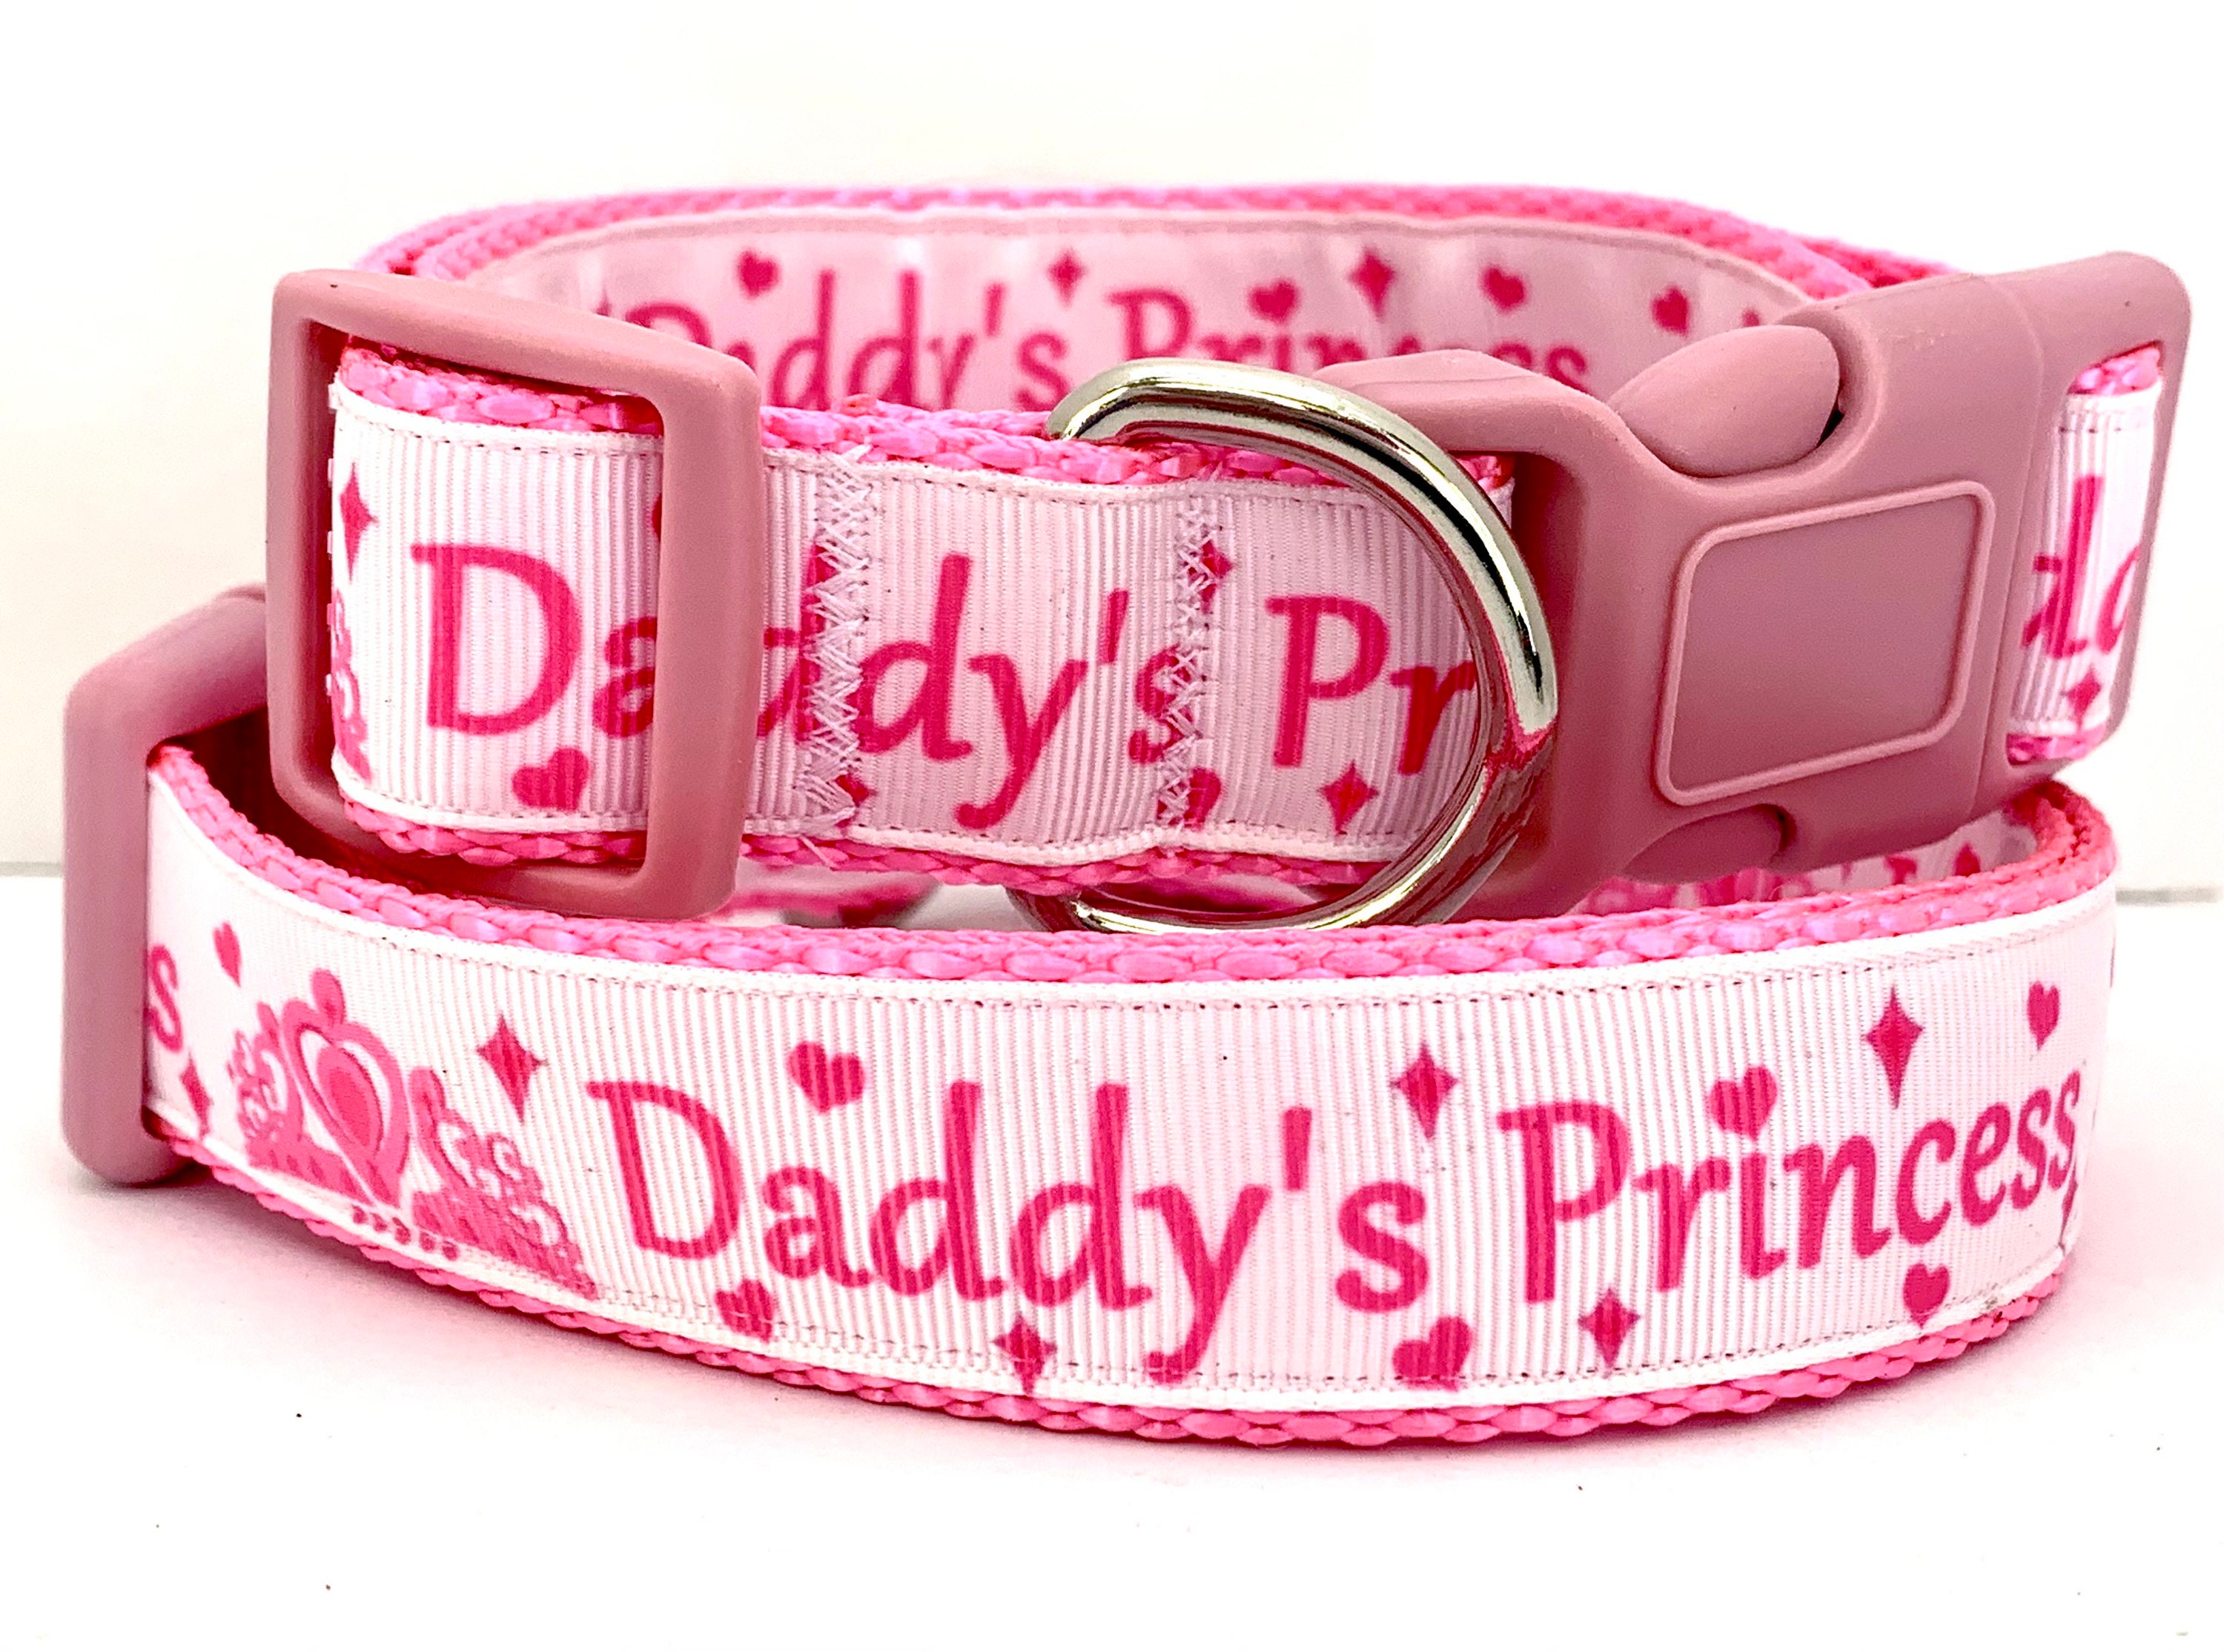 OUT OF STOCK!! COLLAR, HARNESS & LEASH PINK, ADJUSTABLE, FAST  SHIPPING!